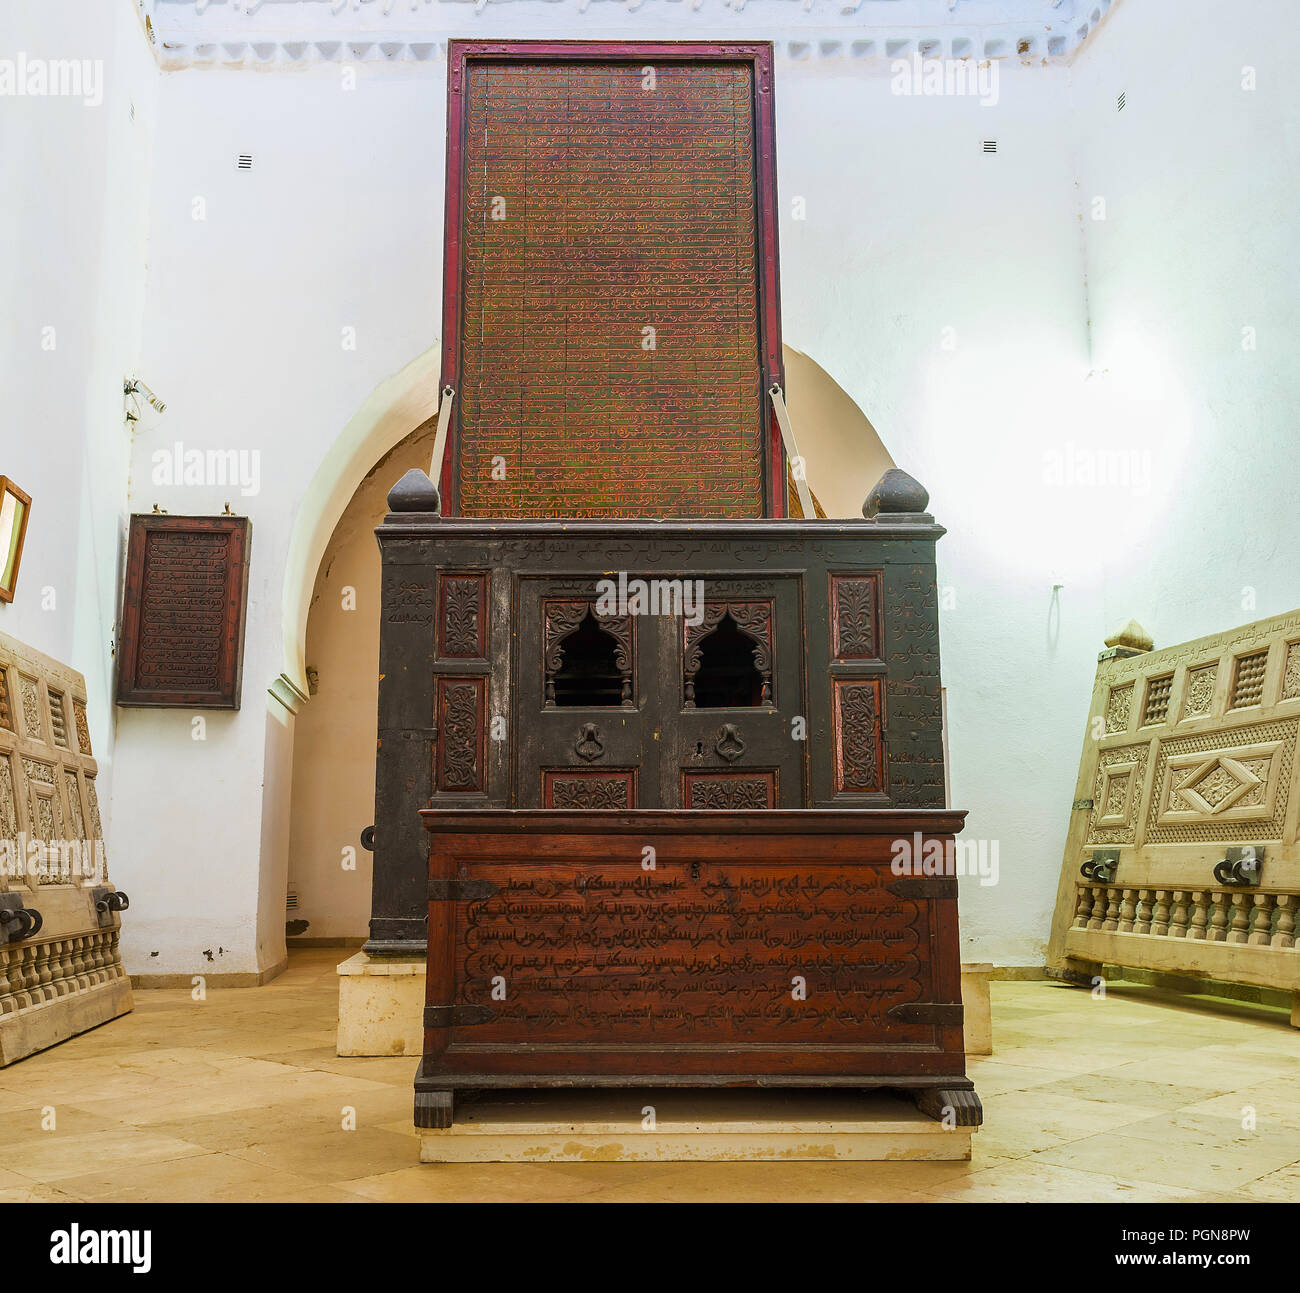 KAIROUAN, TUNISIA - AUGUST 30, 2015: The medieval wooden calligraphic panels in Zaouia of Sidi Amor Abbada, on August 30 in Kairouan. Stock Photo